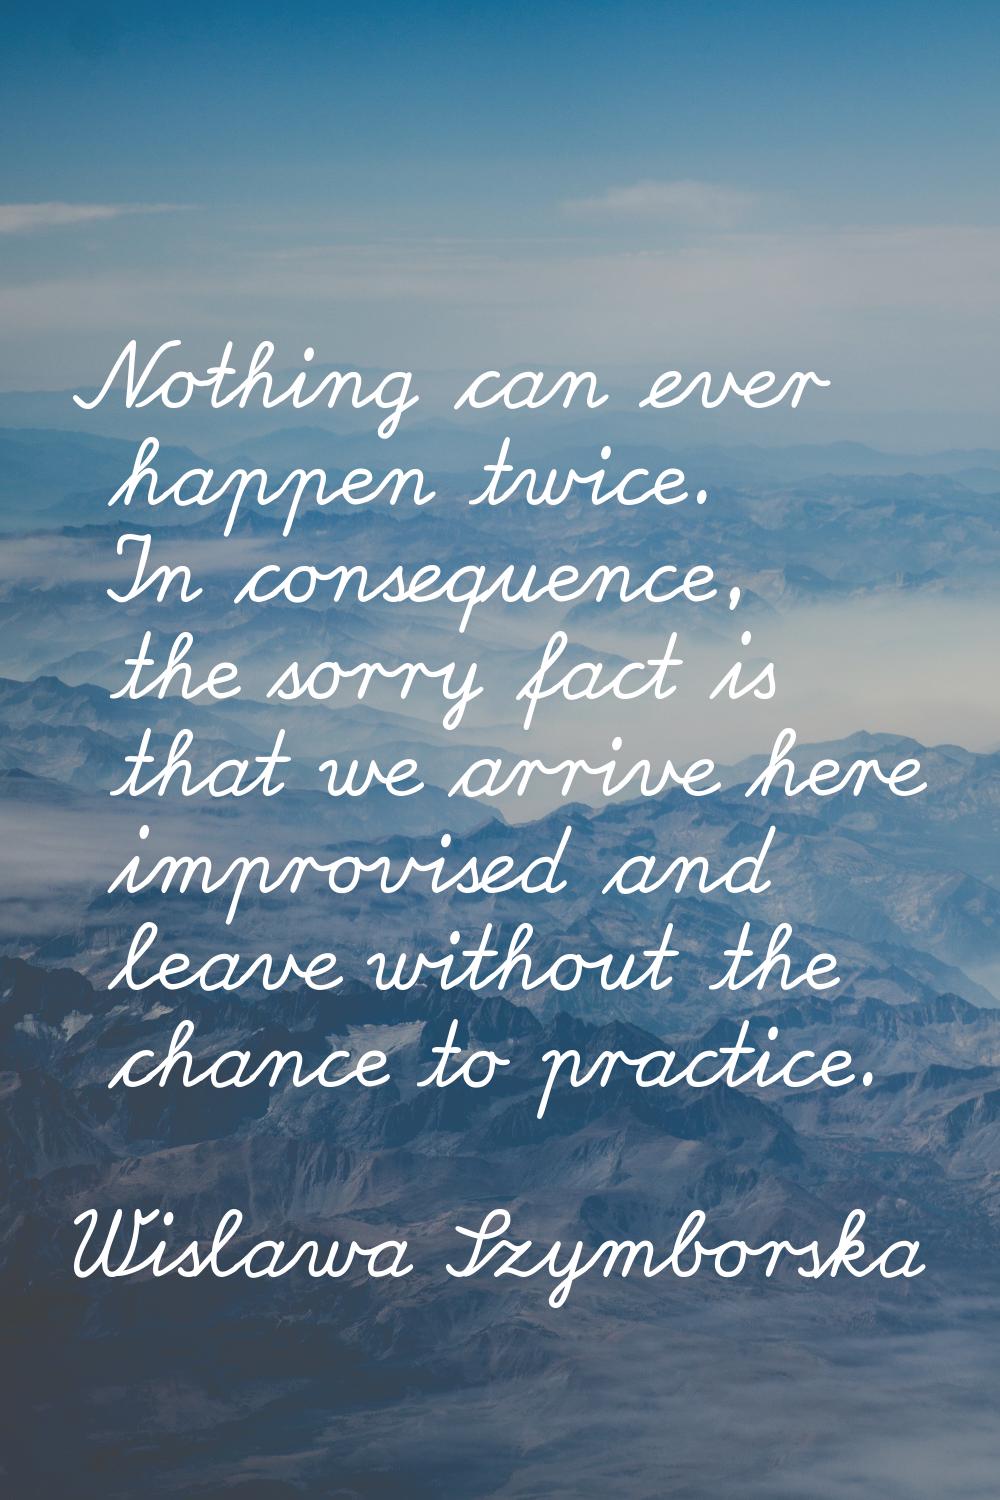 Nothing can ever happen twice. In consequence, the sorry fact is that we arrive here improvised and